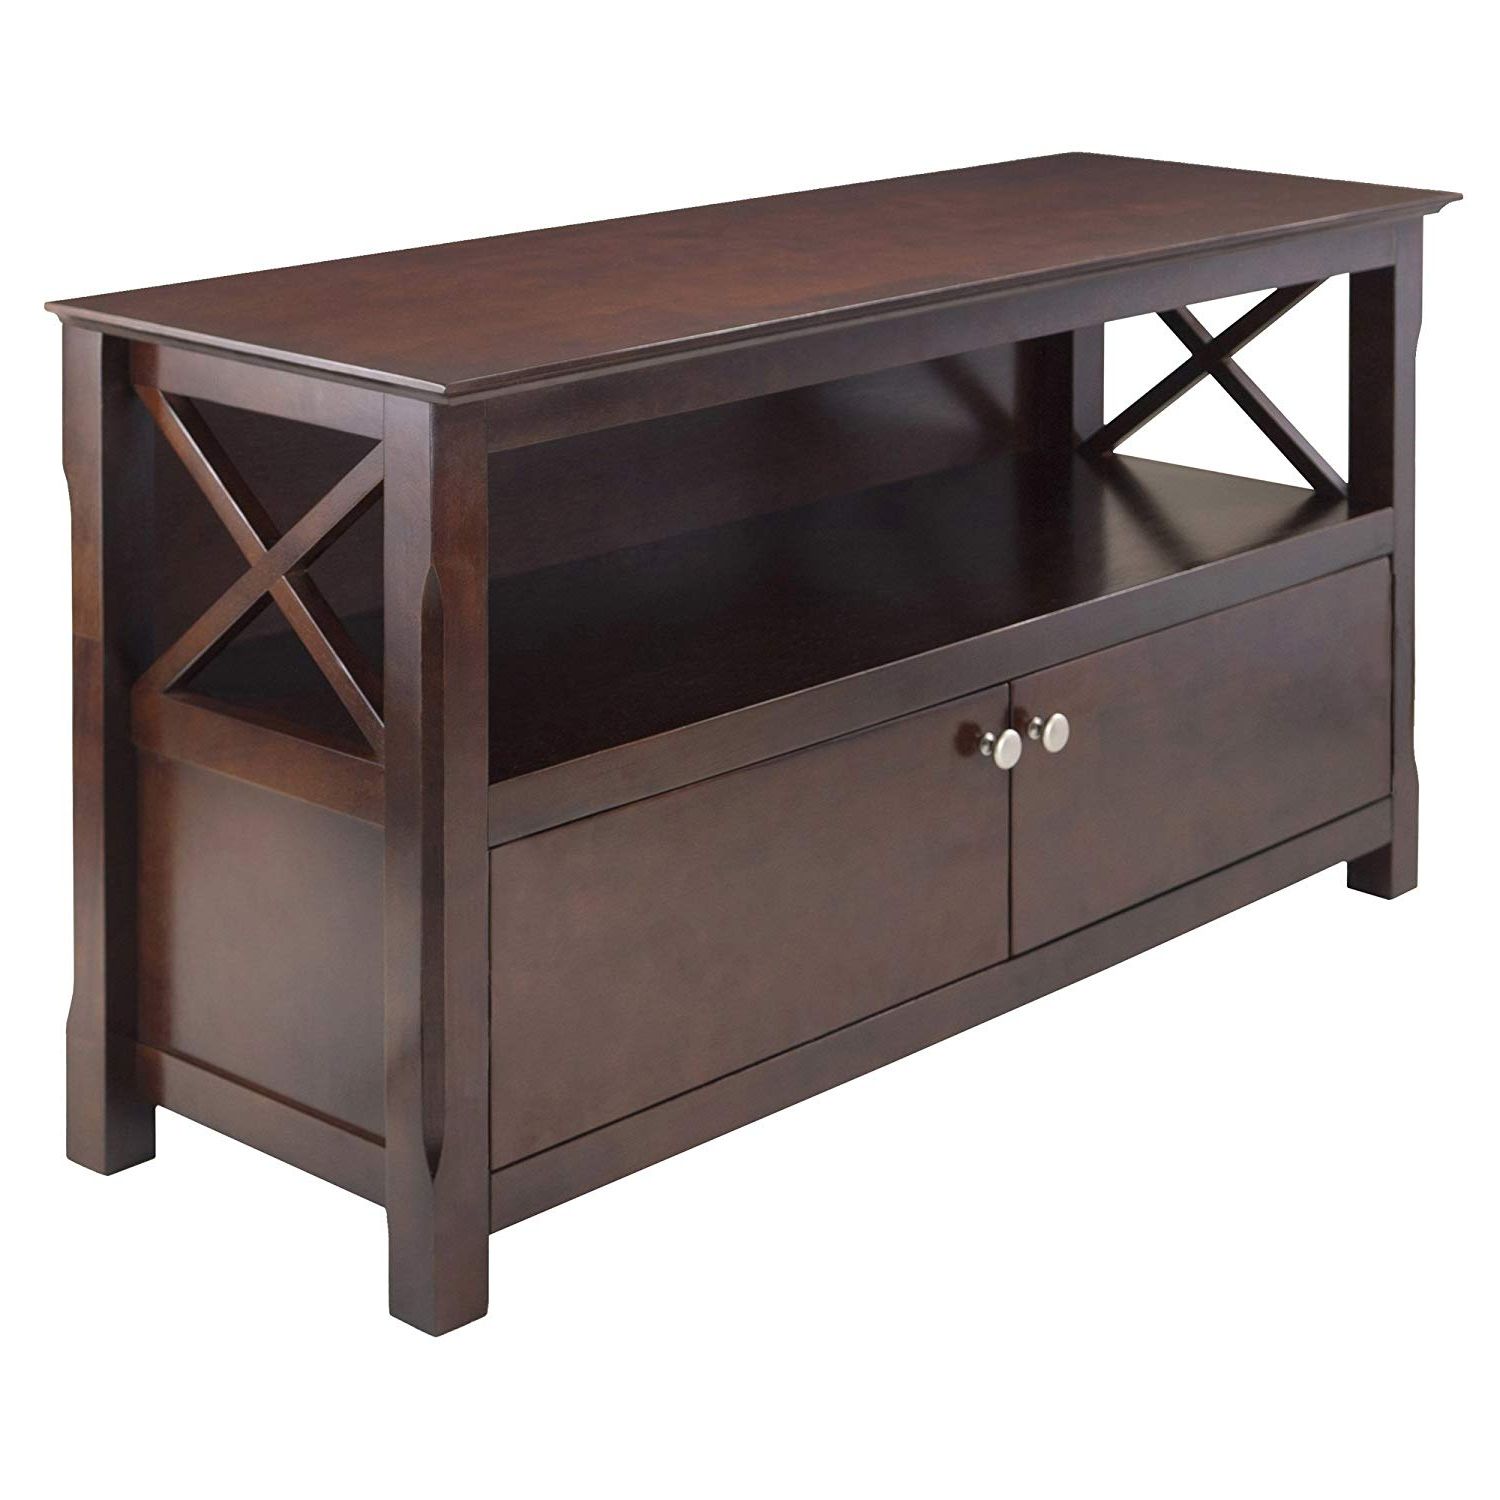 Amazon: Winsome Wood Xola Tv Stand: Kitchen & Dining For Widely Used Single Shelf Tv Stands (Photo 17 of 20)